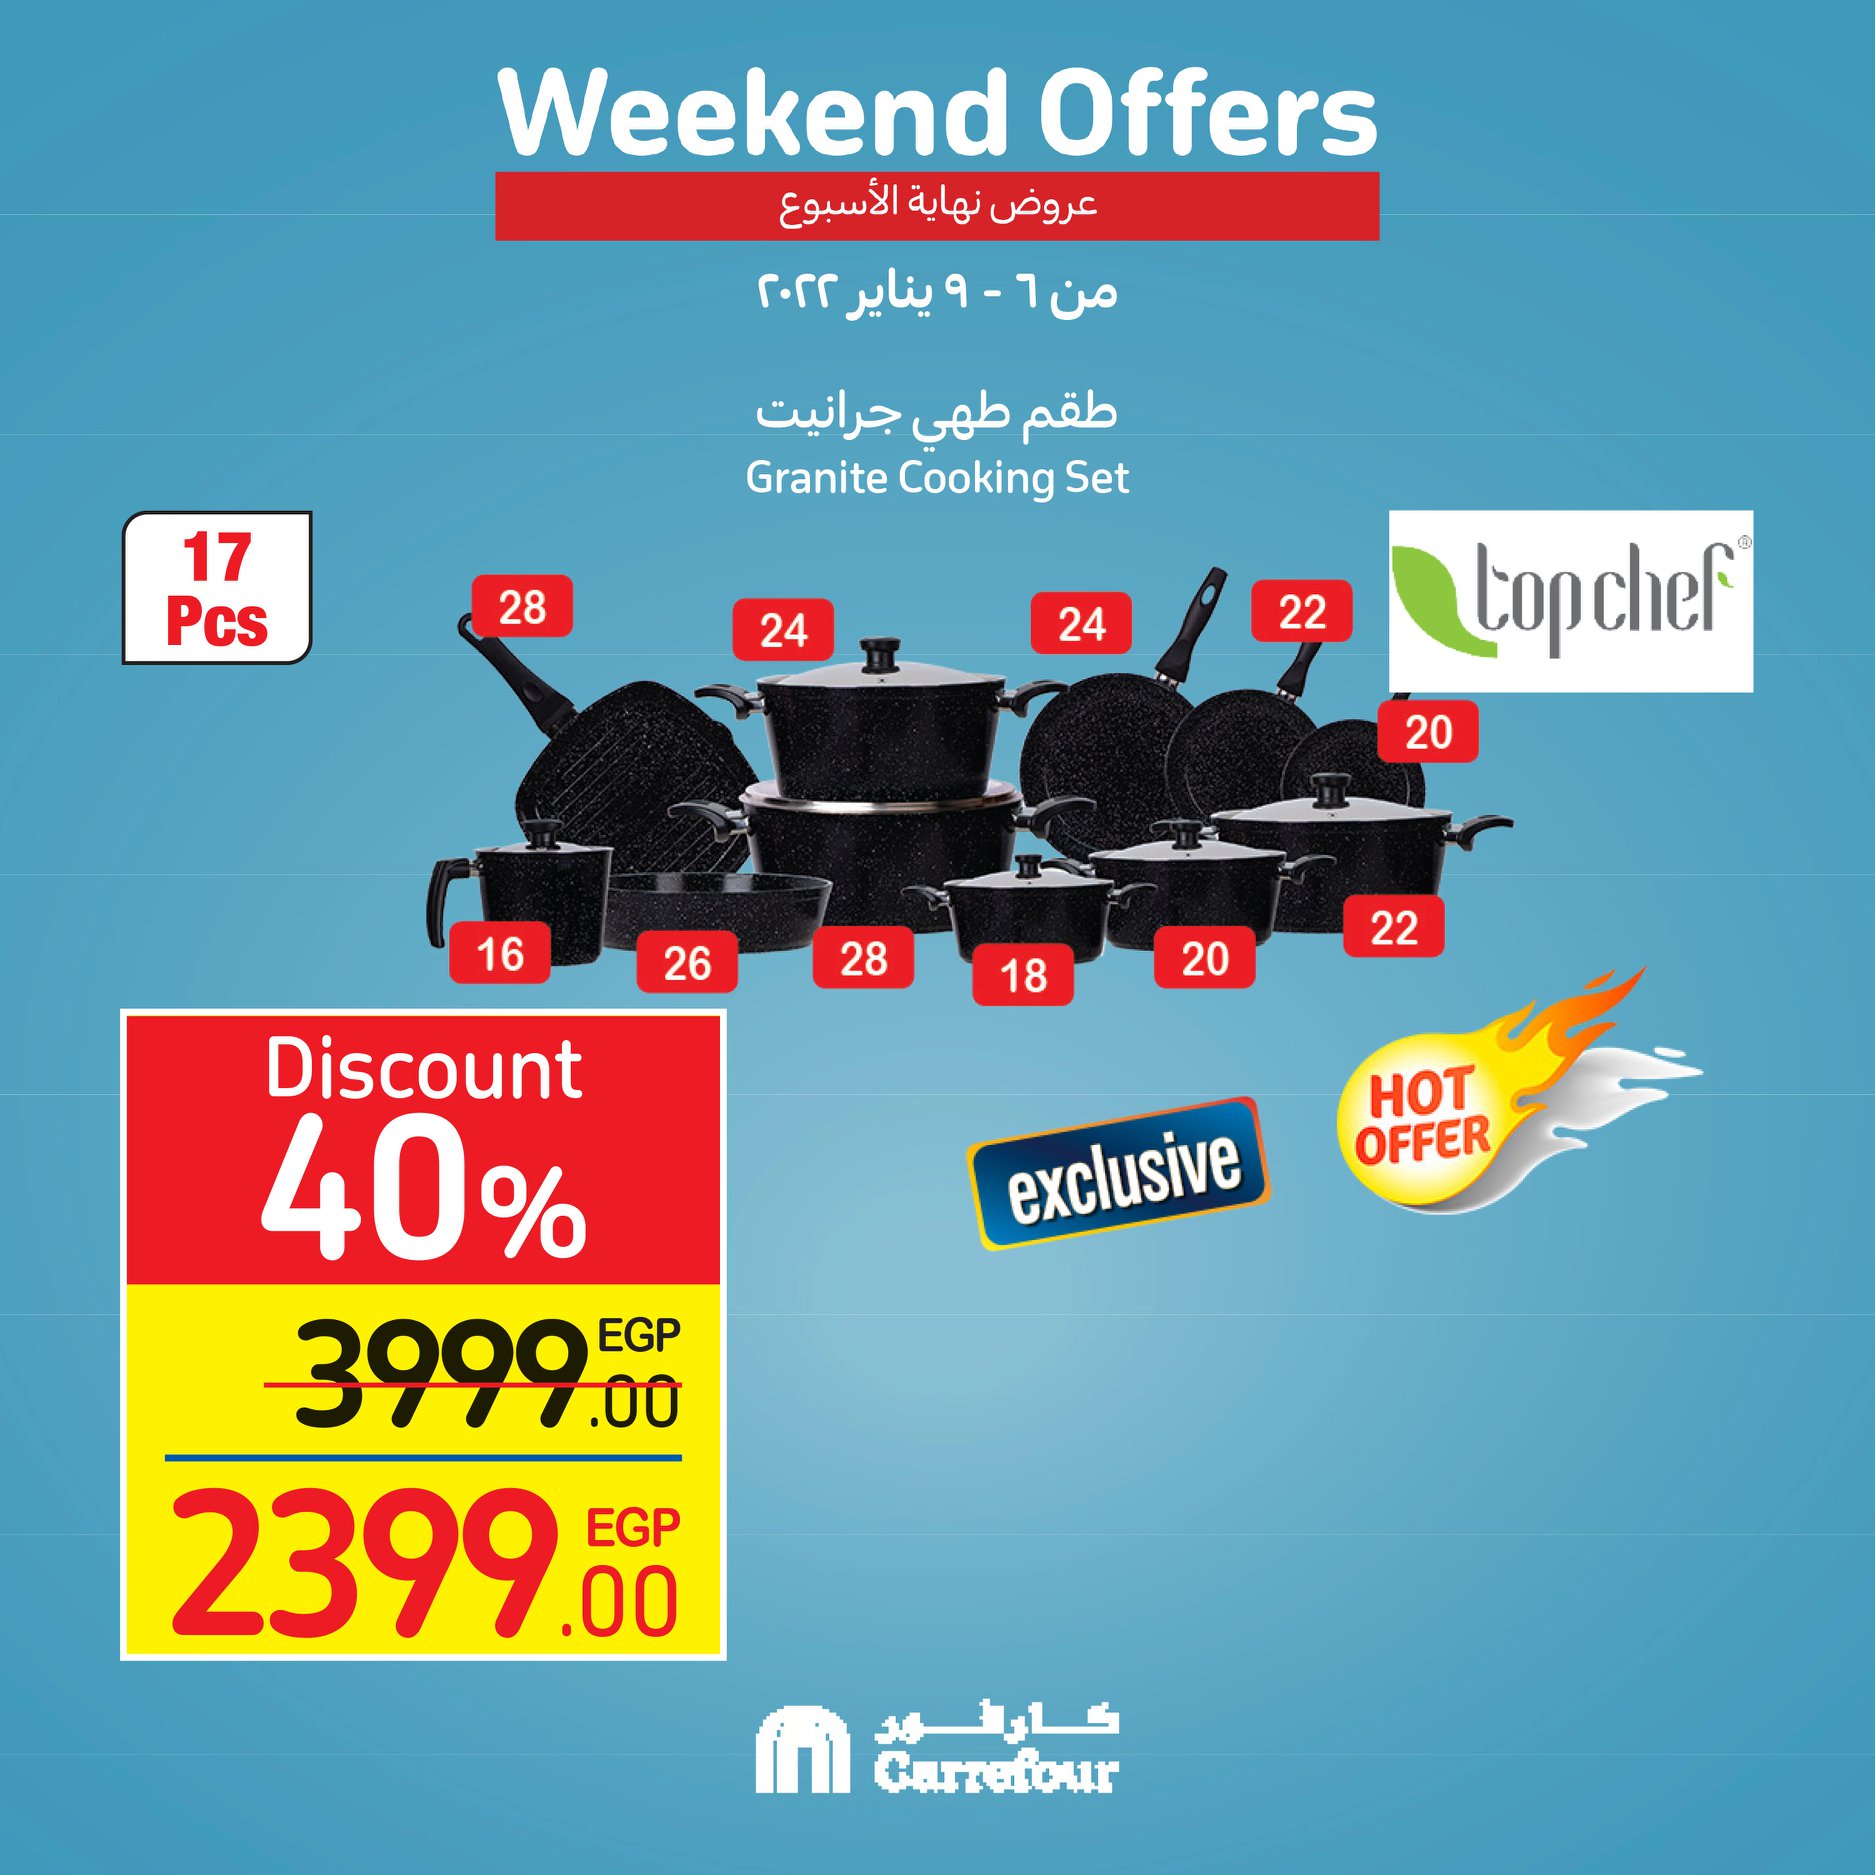 Now, the strongest Carrefour offers and surprises, half-price discounts, at Weekend until January 16th, 23